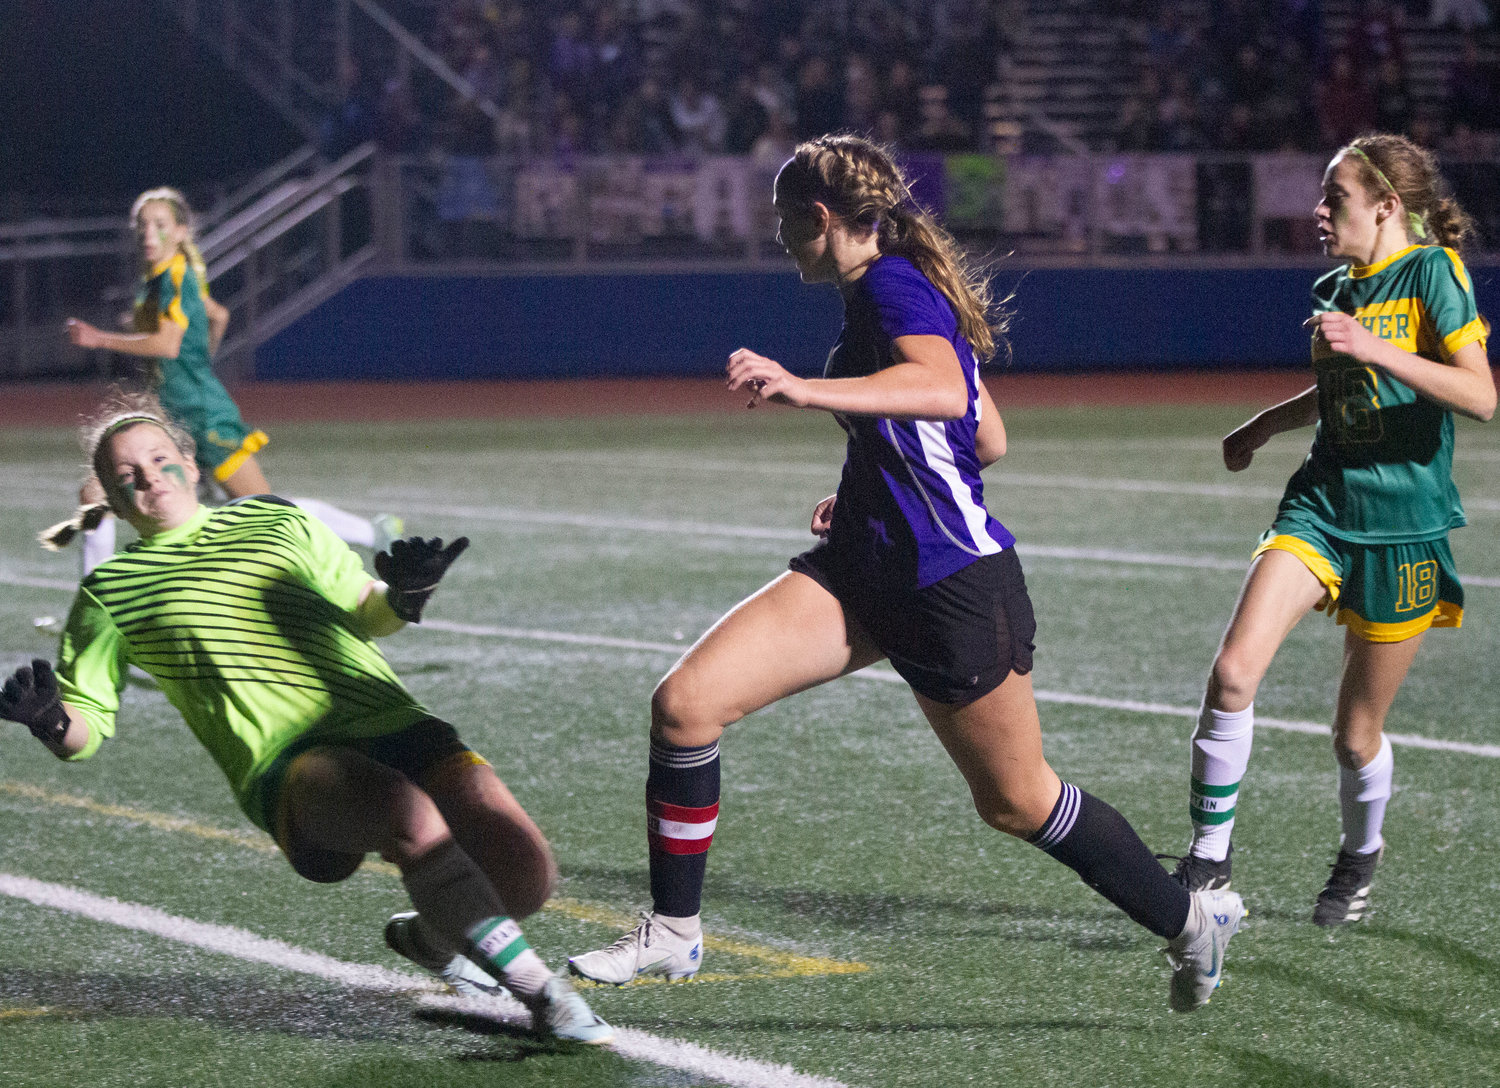 Sara Nencka scores an insurance goal in in the second half.